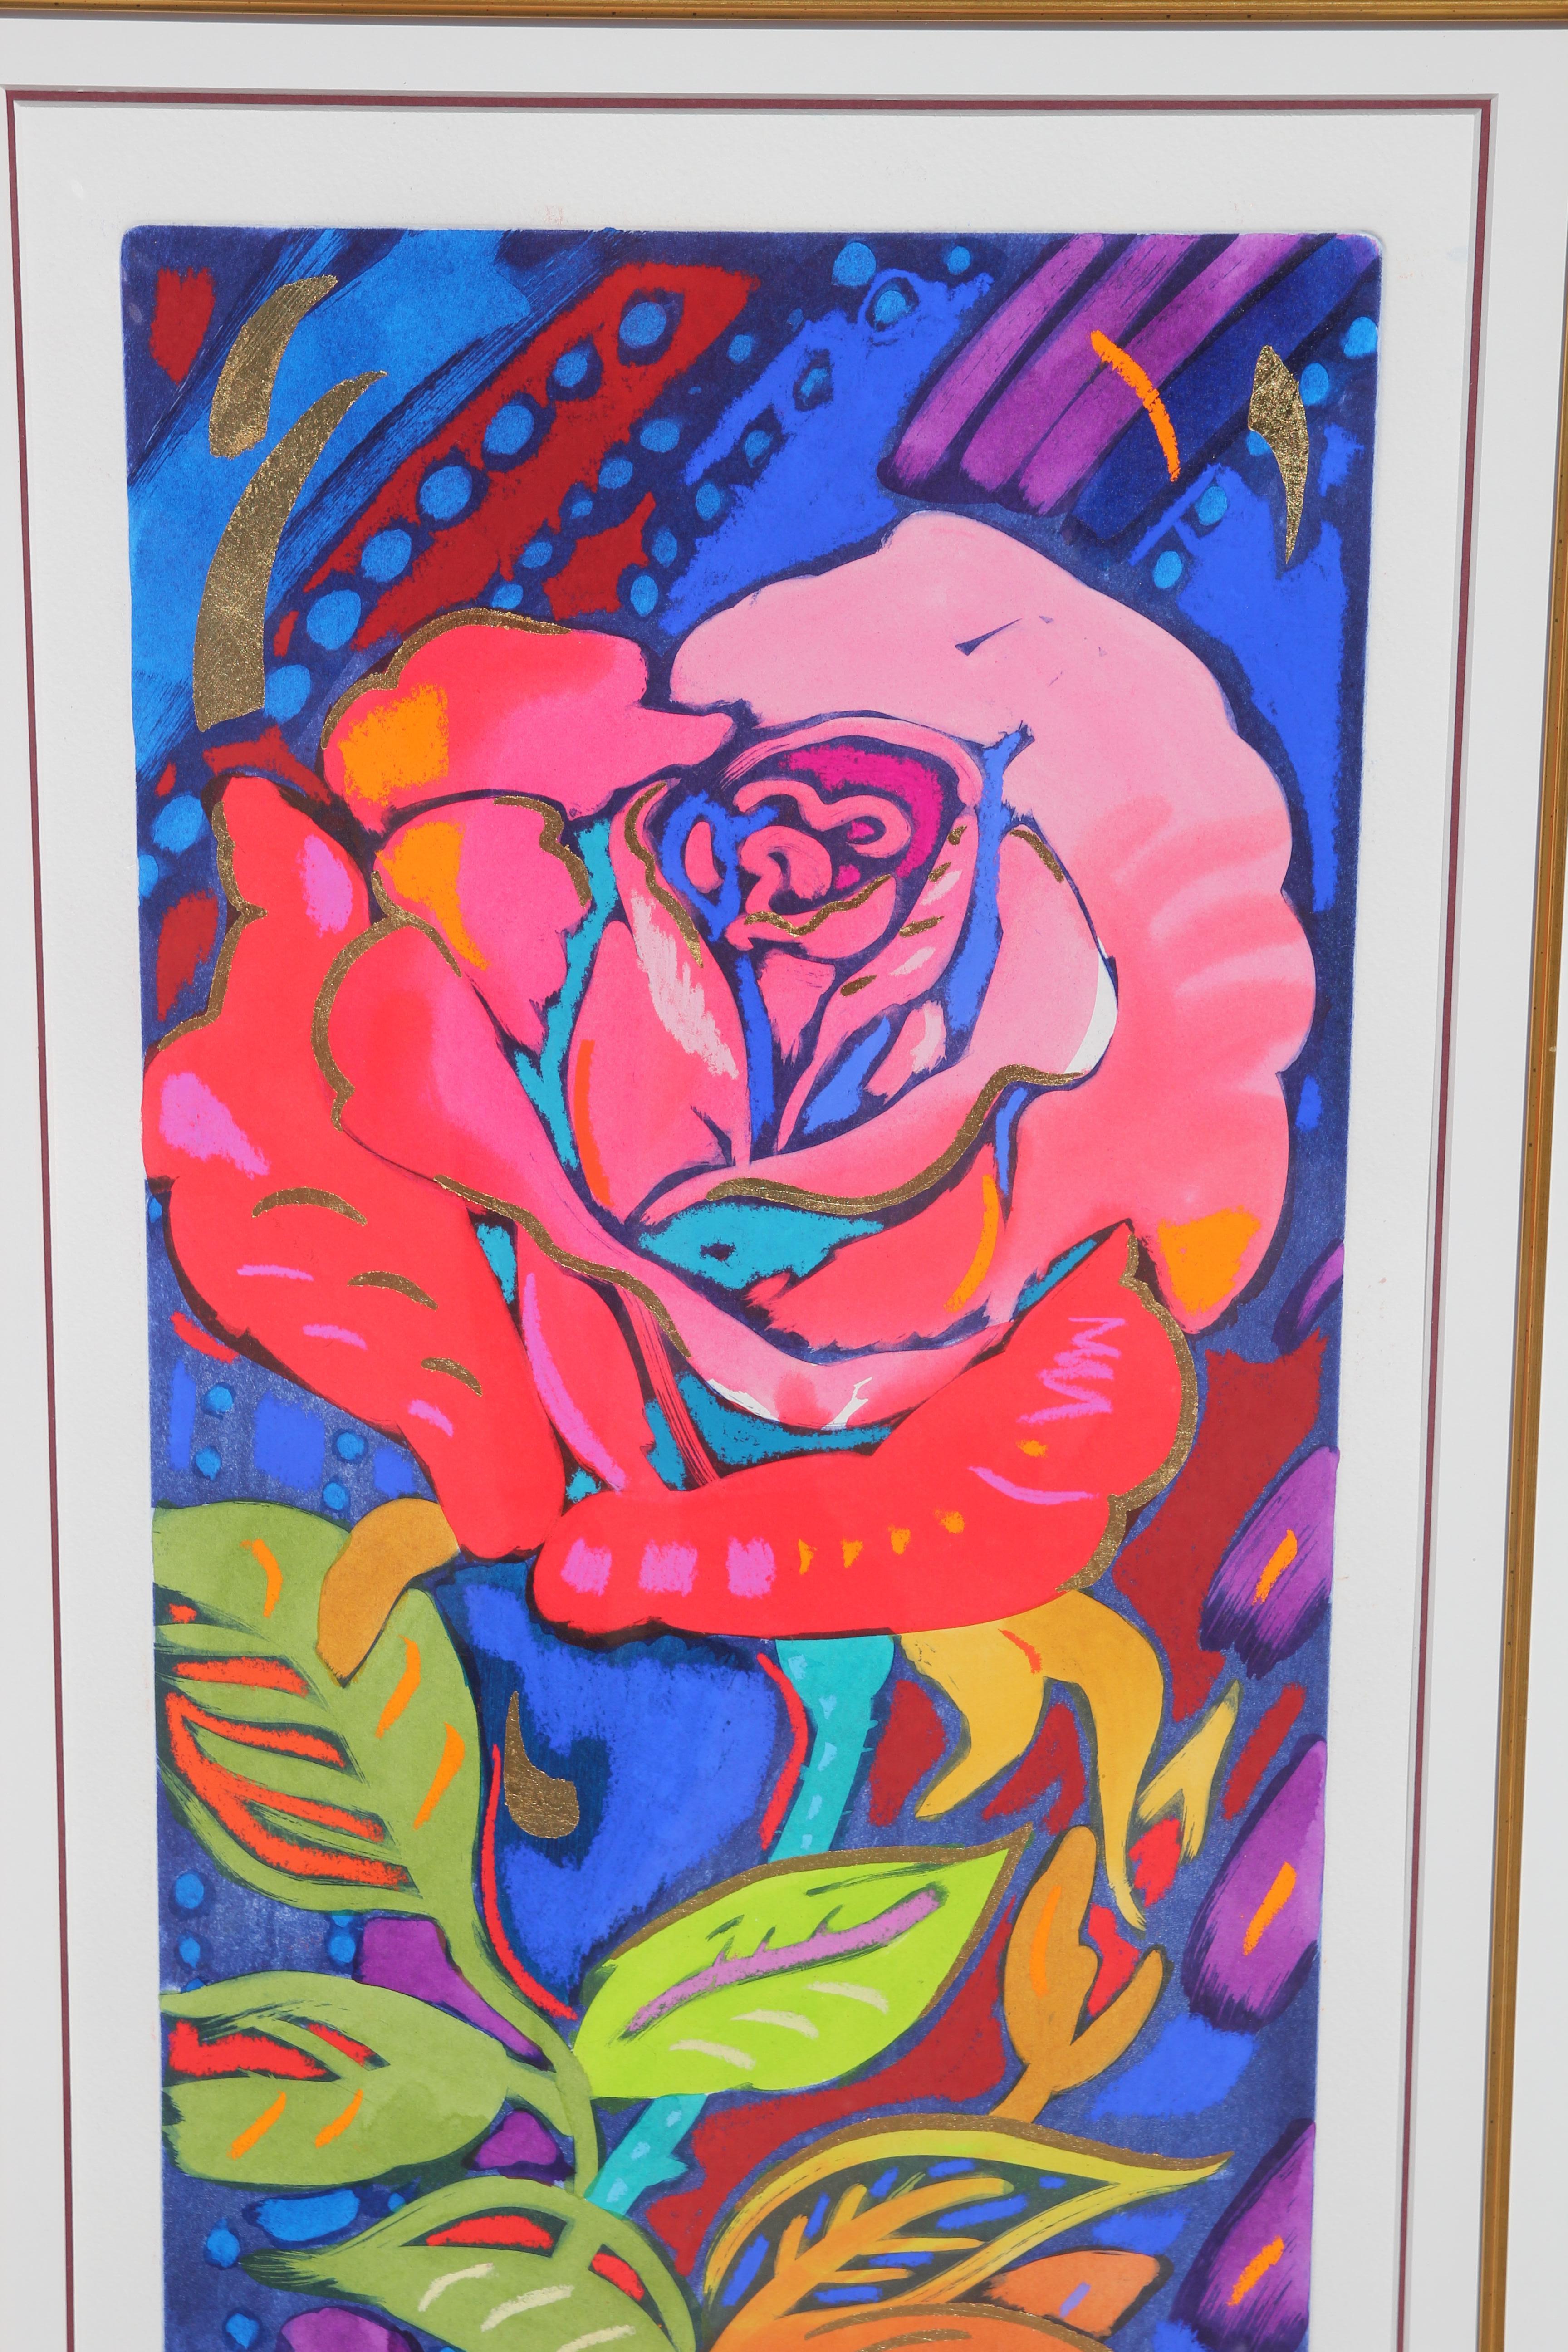 Colorful still life painting of a rose done in an impressionist style. The piece is signed, titled, and editioned by the artist. The work is framed in a gold frame with a white matte.
Dimensions without frame: H 27 in x W 14 in.

Artist Biography: